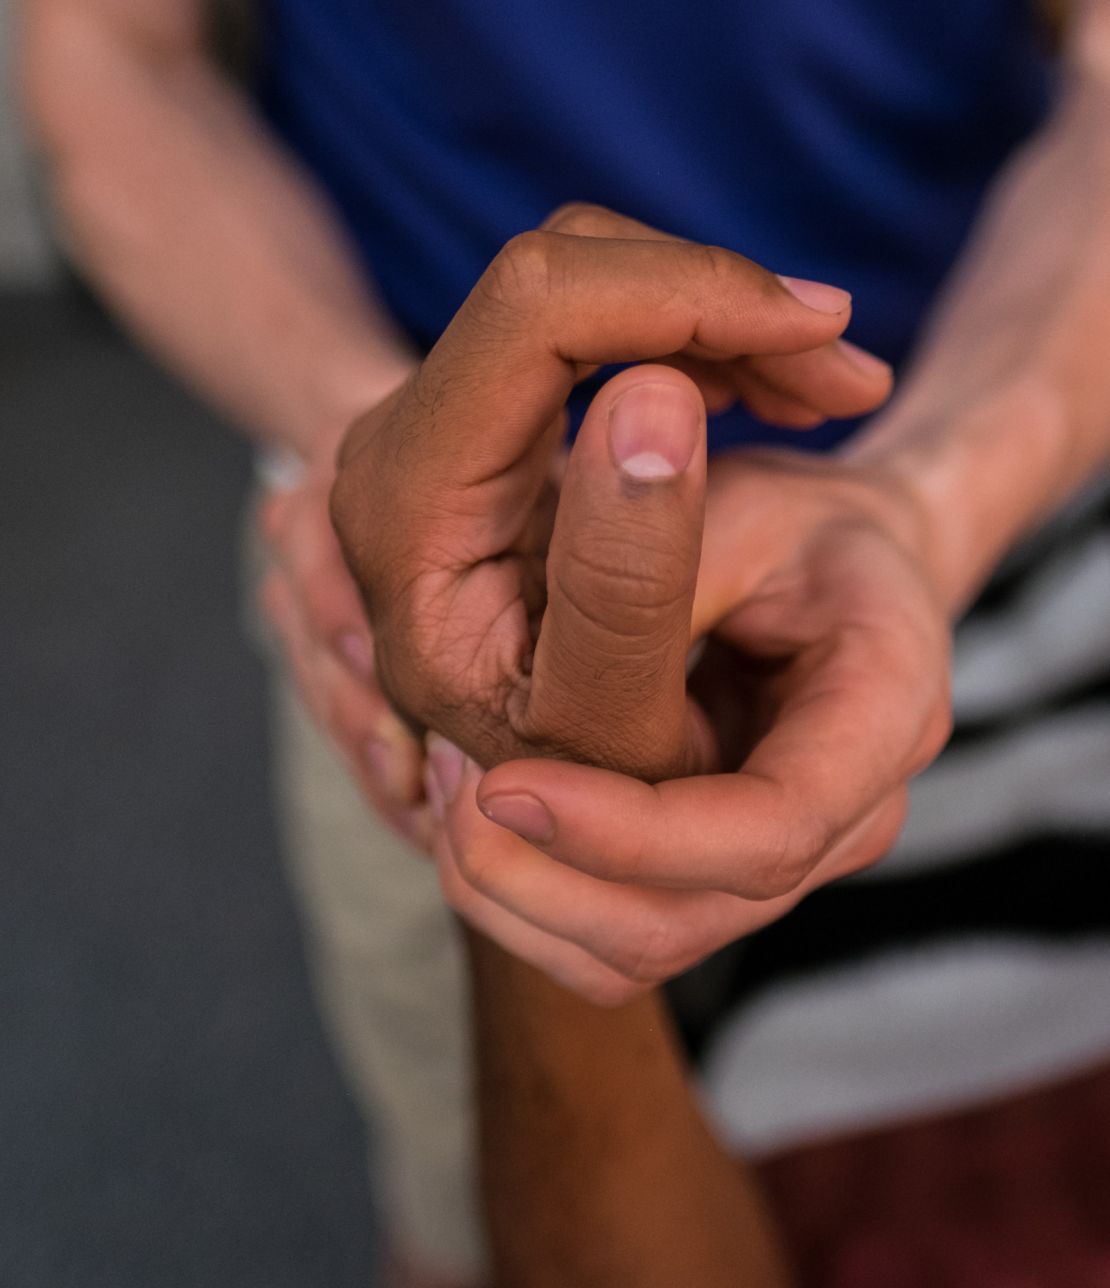 Photo: Manual therapy - practitioner hands on client hand